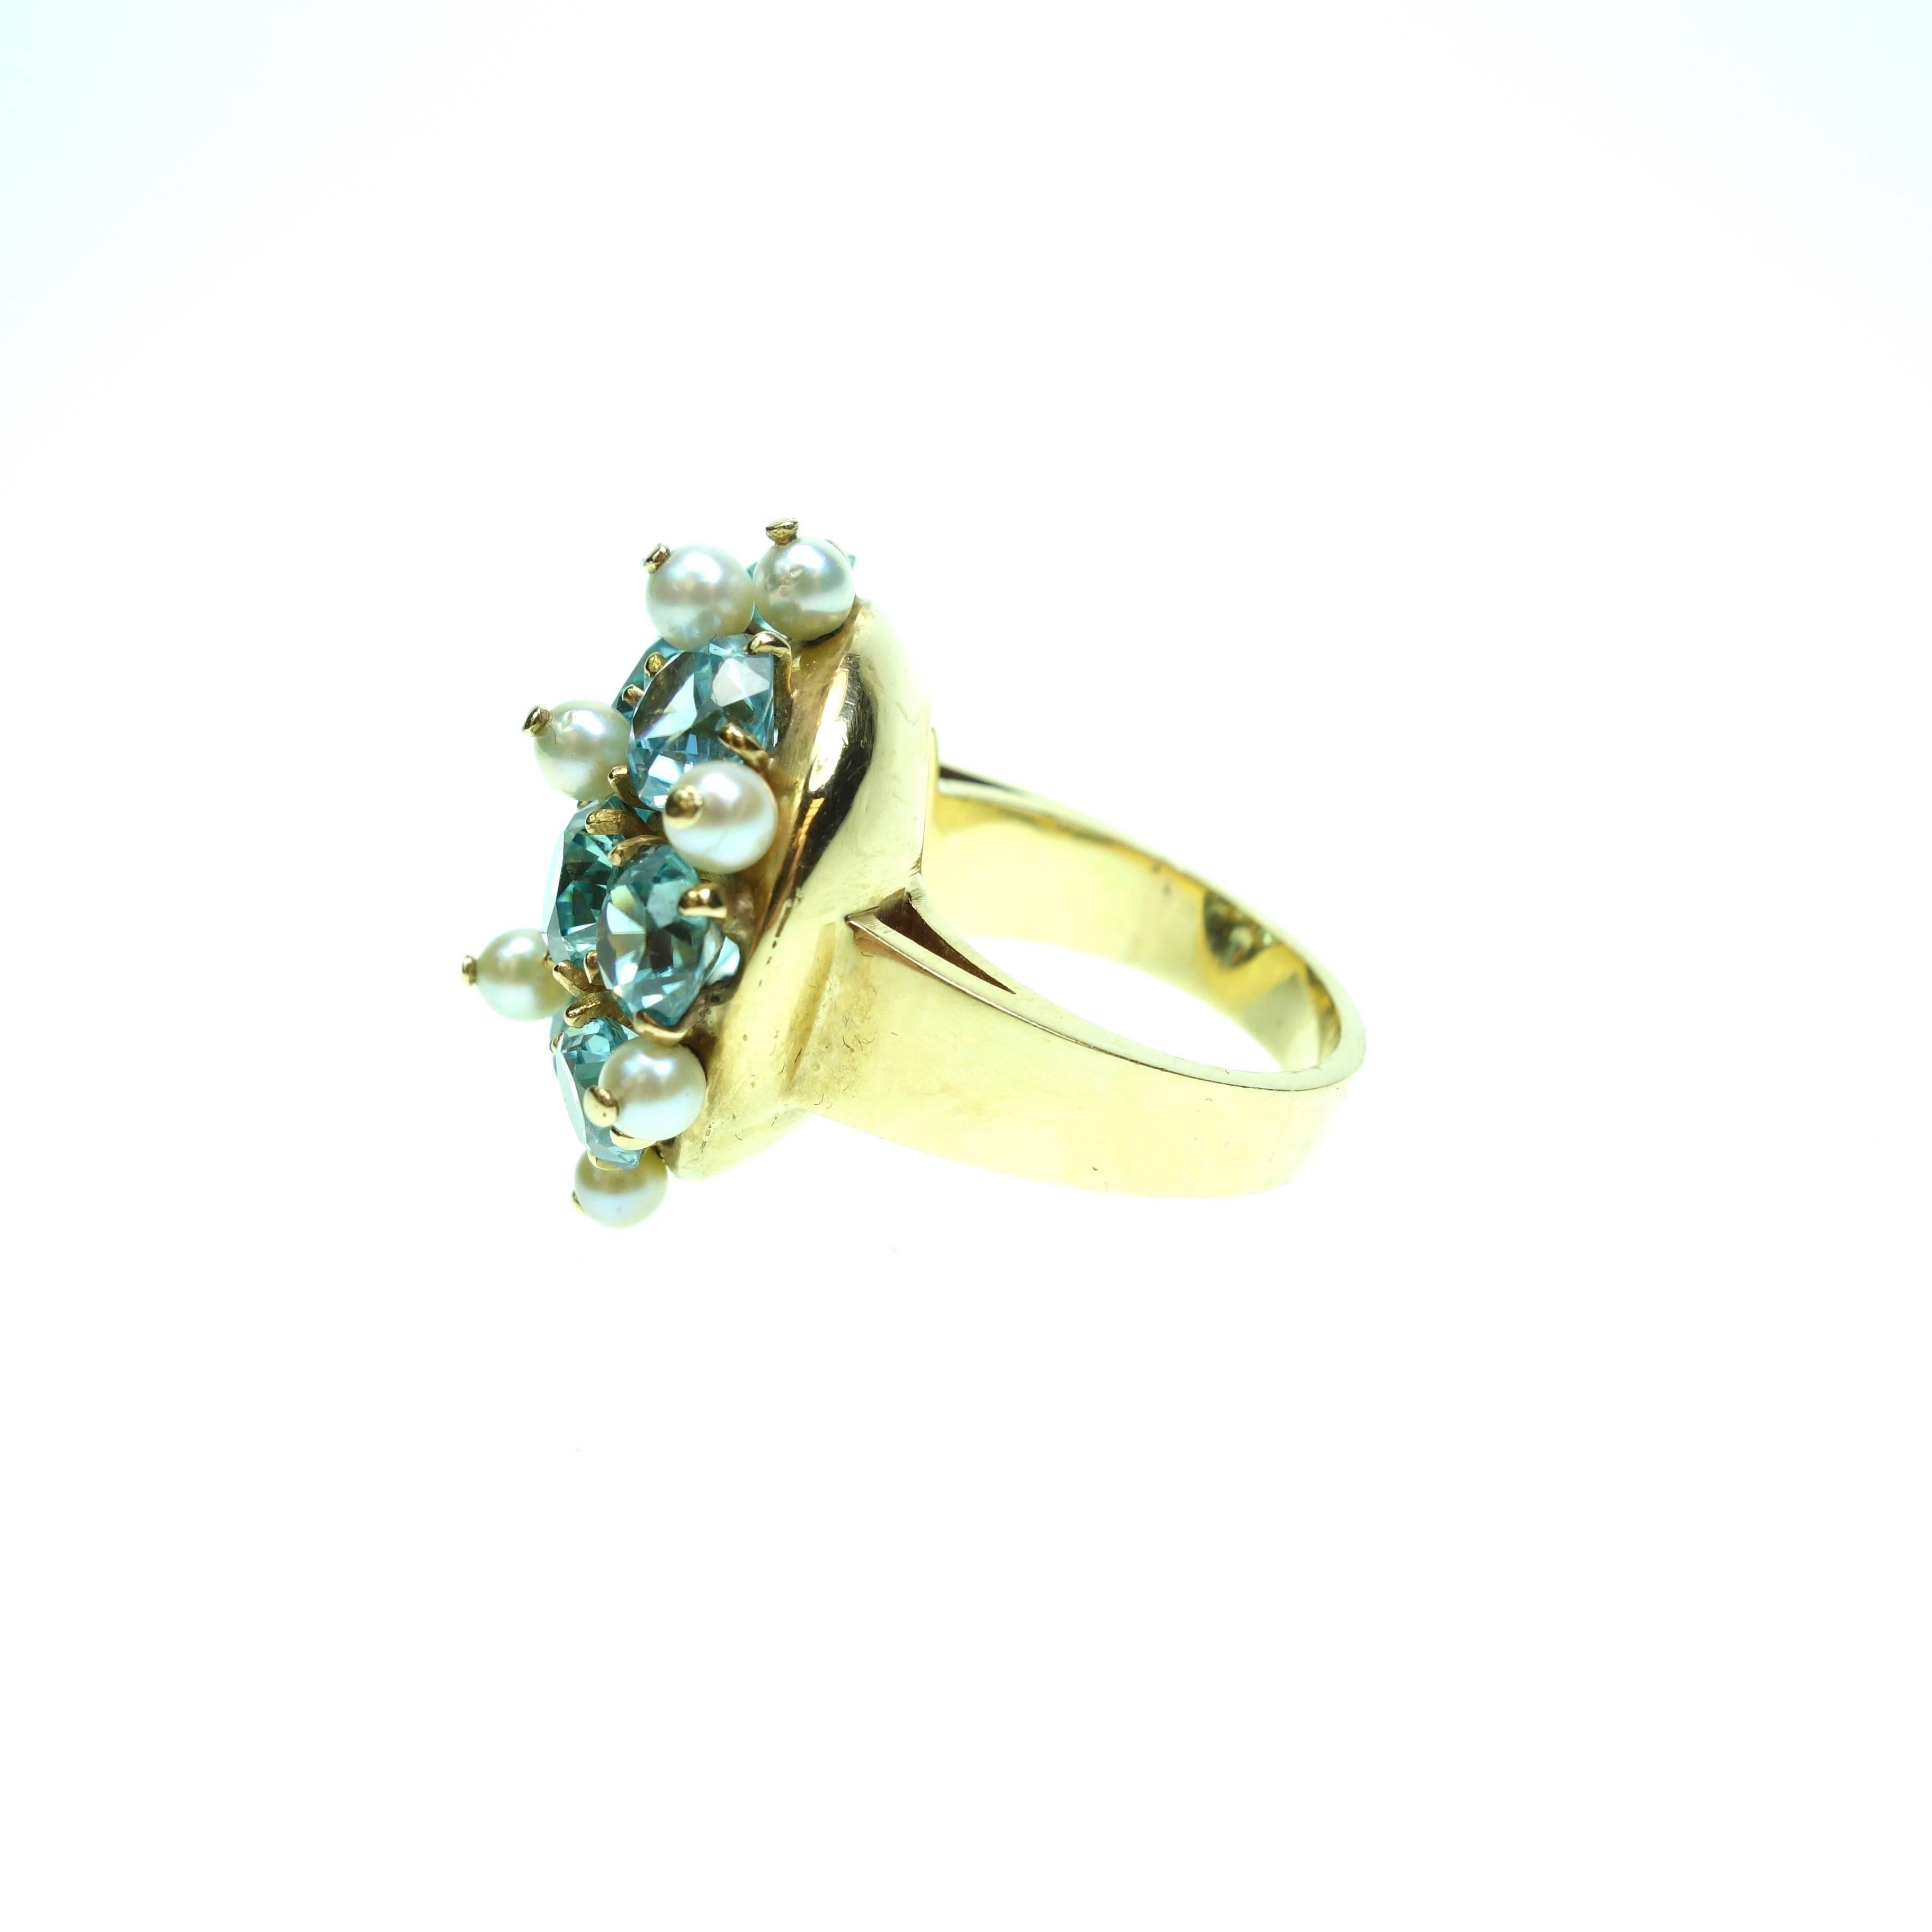 This unique 14K gold Blue Zircon and Pearl cocktail dinner ring showcases that phenomenal zircon flash and sparkle. The head of this cluster measures 23 mm  in diameter.  The blue zircons are interspersed with twelve 3.5mm pearls. The yellow shank